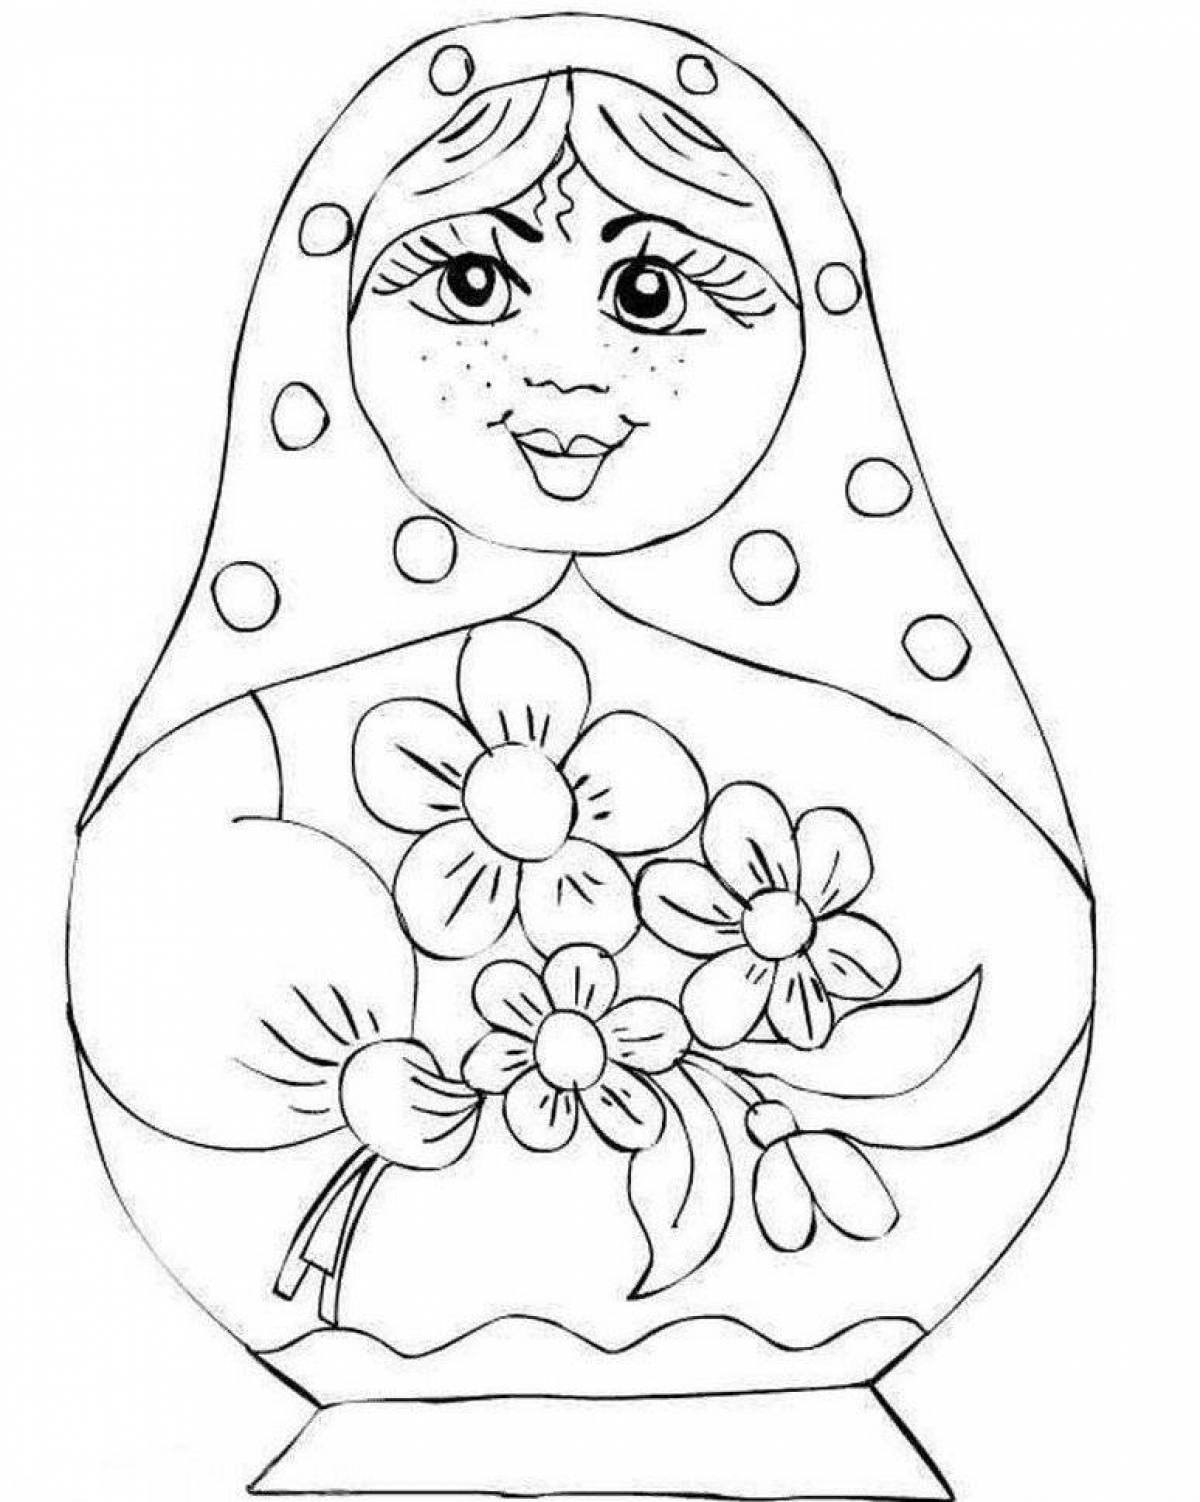 Coloring matryoshka with rich colors